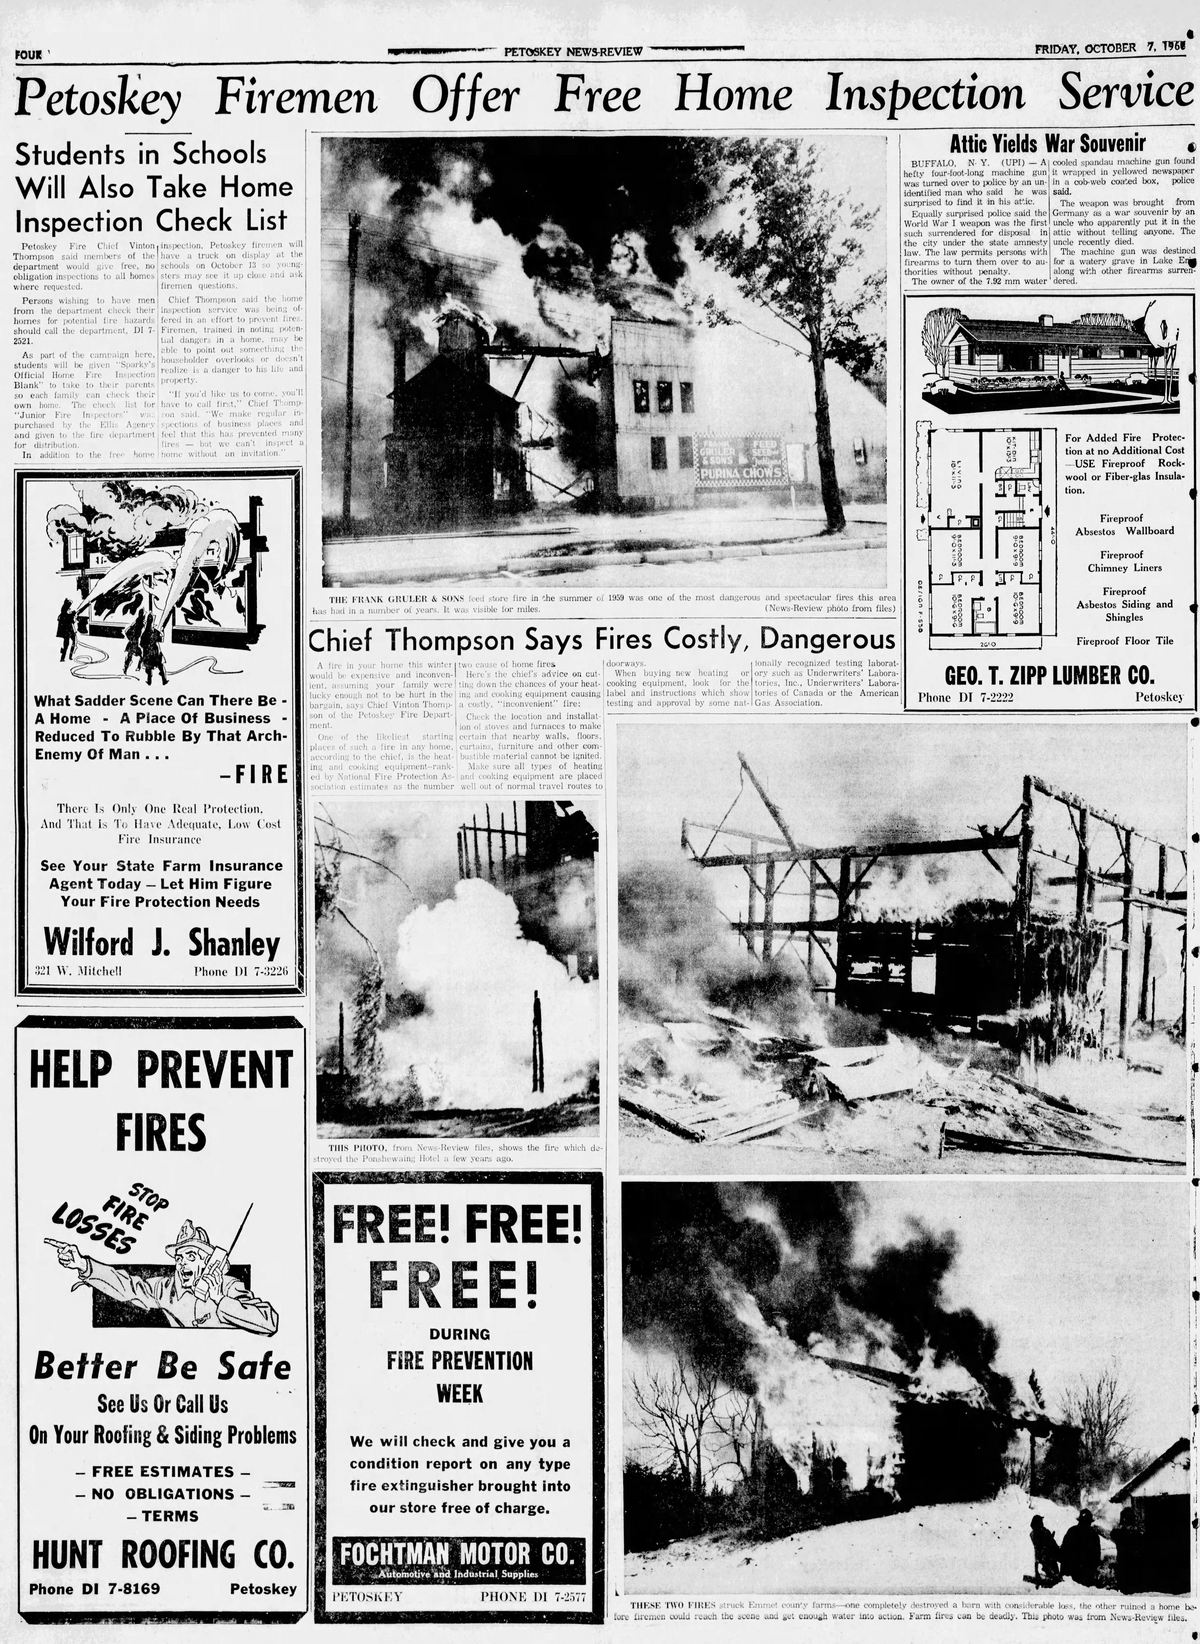 Ponshewaing Hotel - Oct 7 1960 Article On Fires (newer photo)